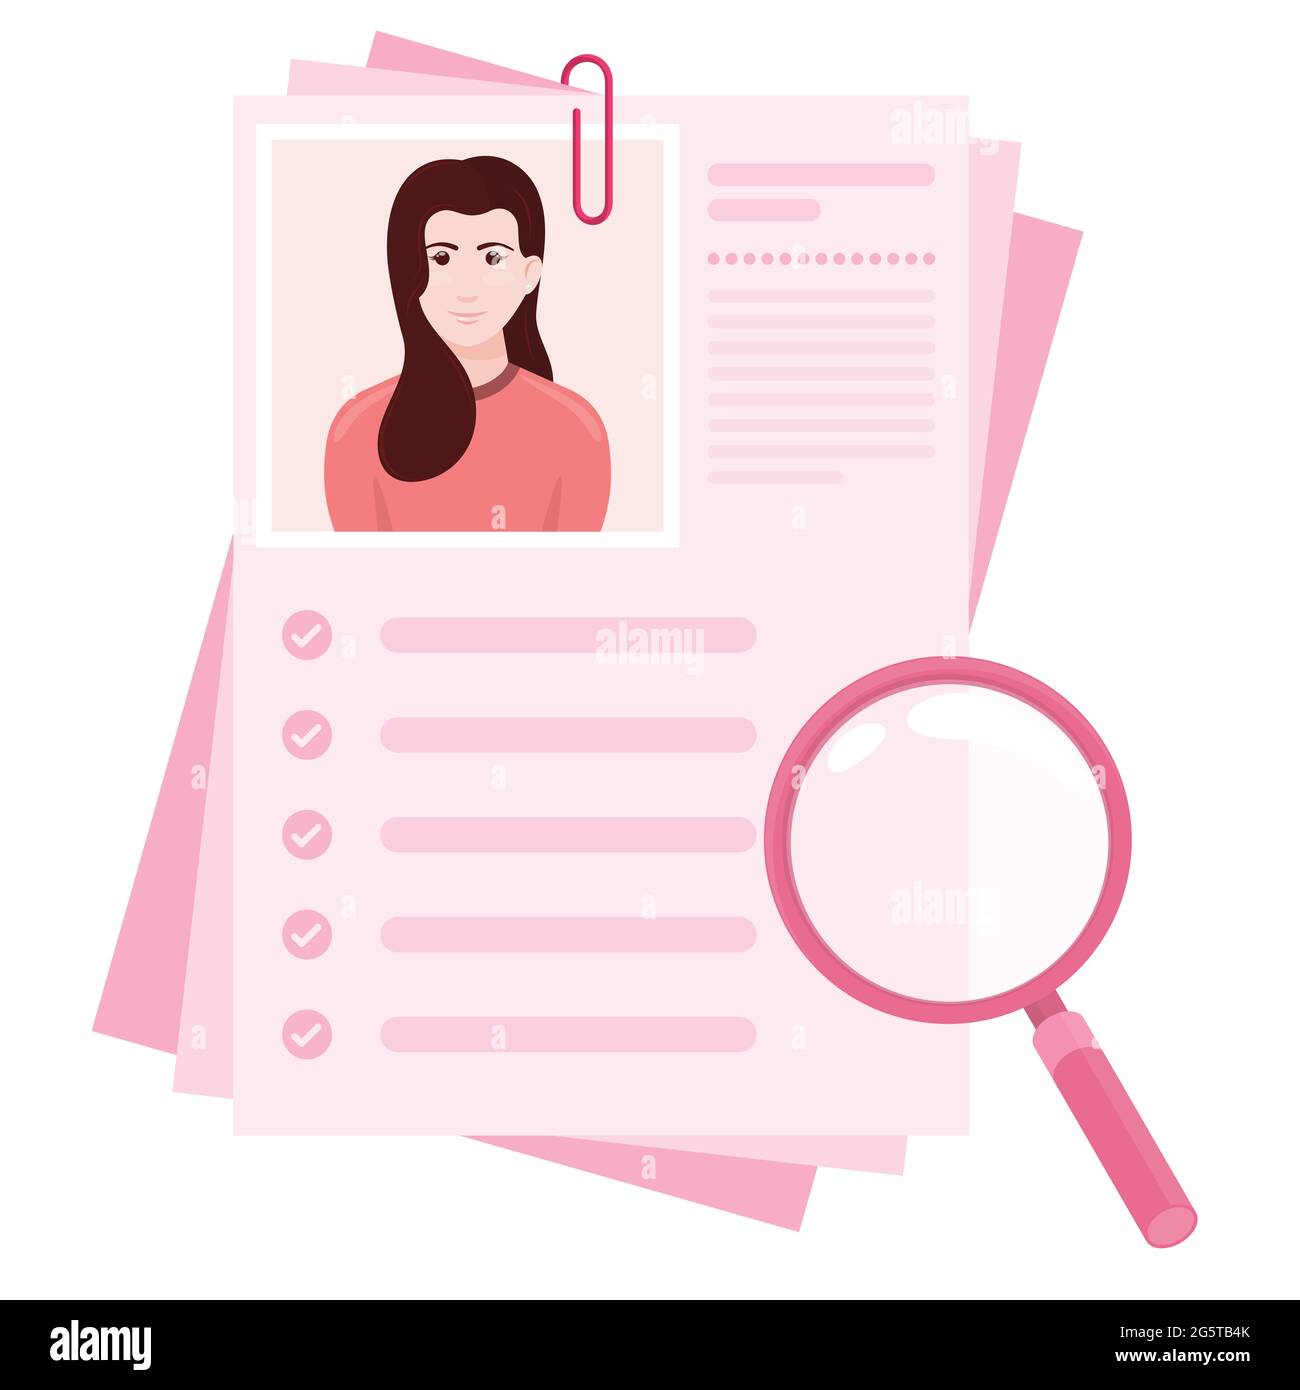 Vector design of curriculum vitae with photo of girl, resume for job search with magnifying glass Stock Vector